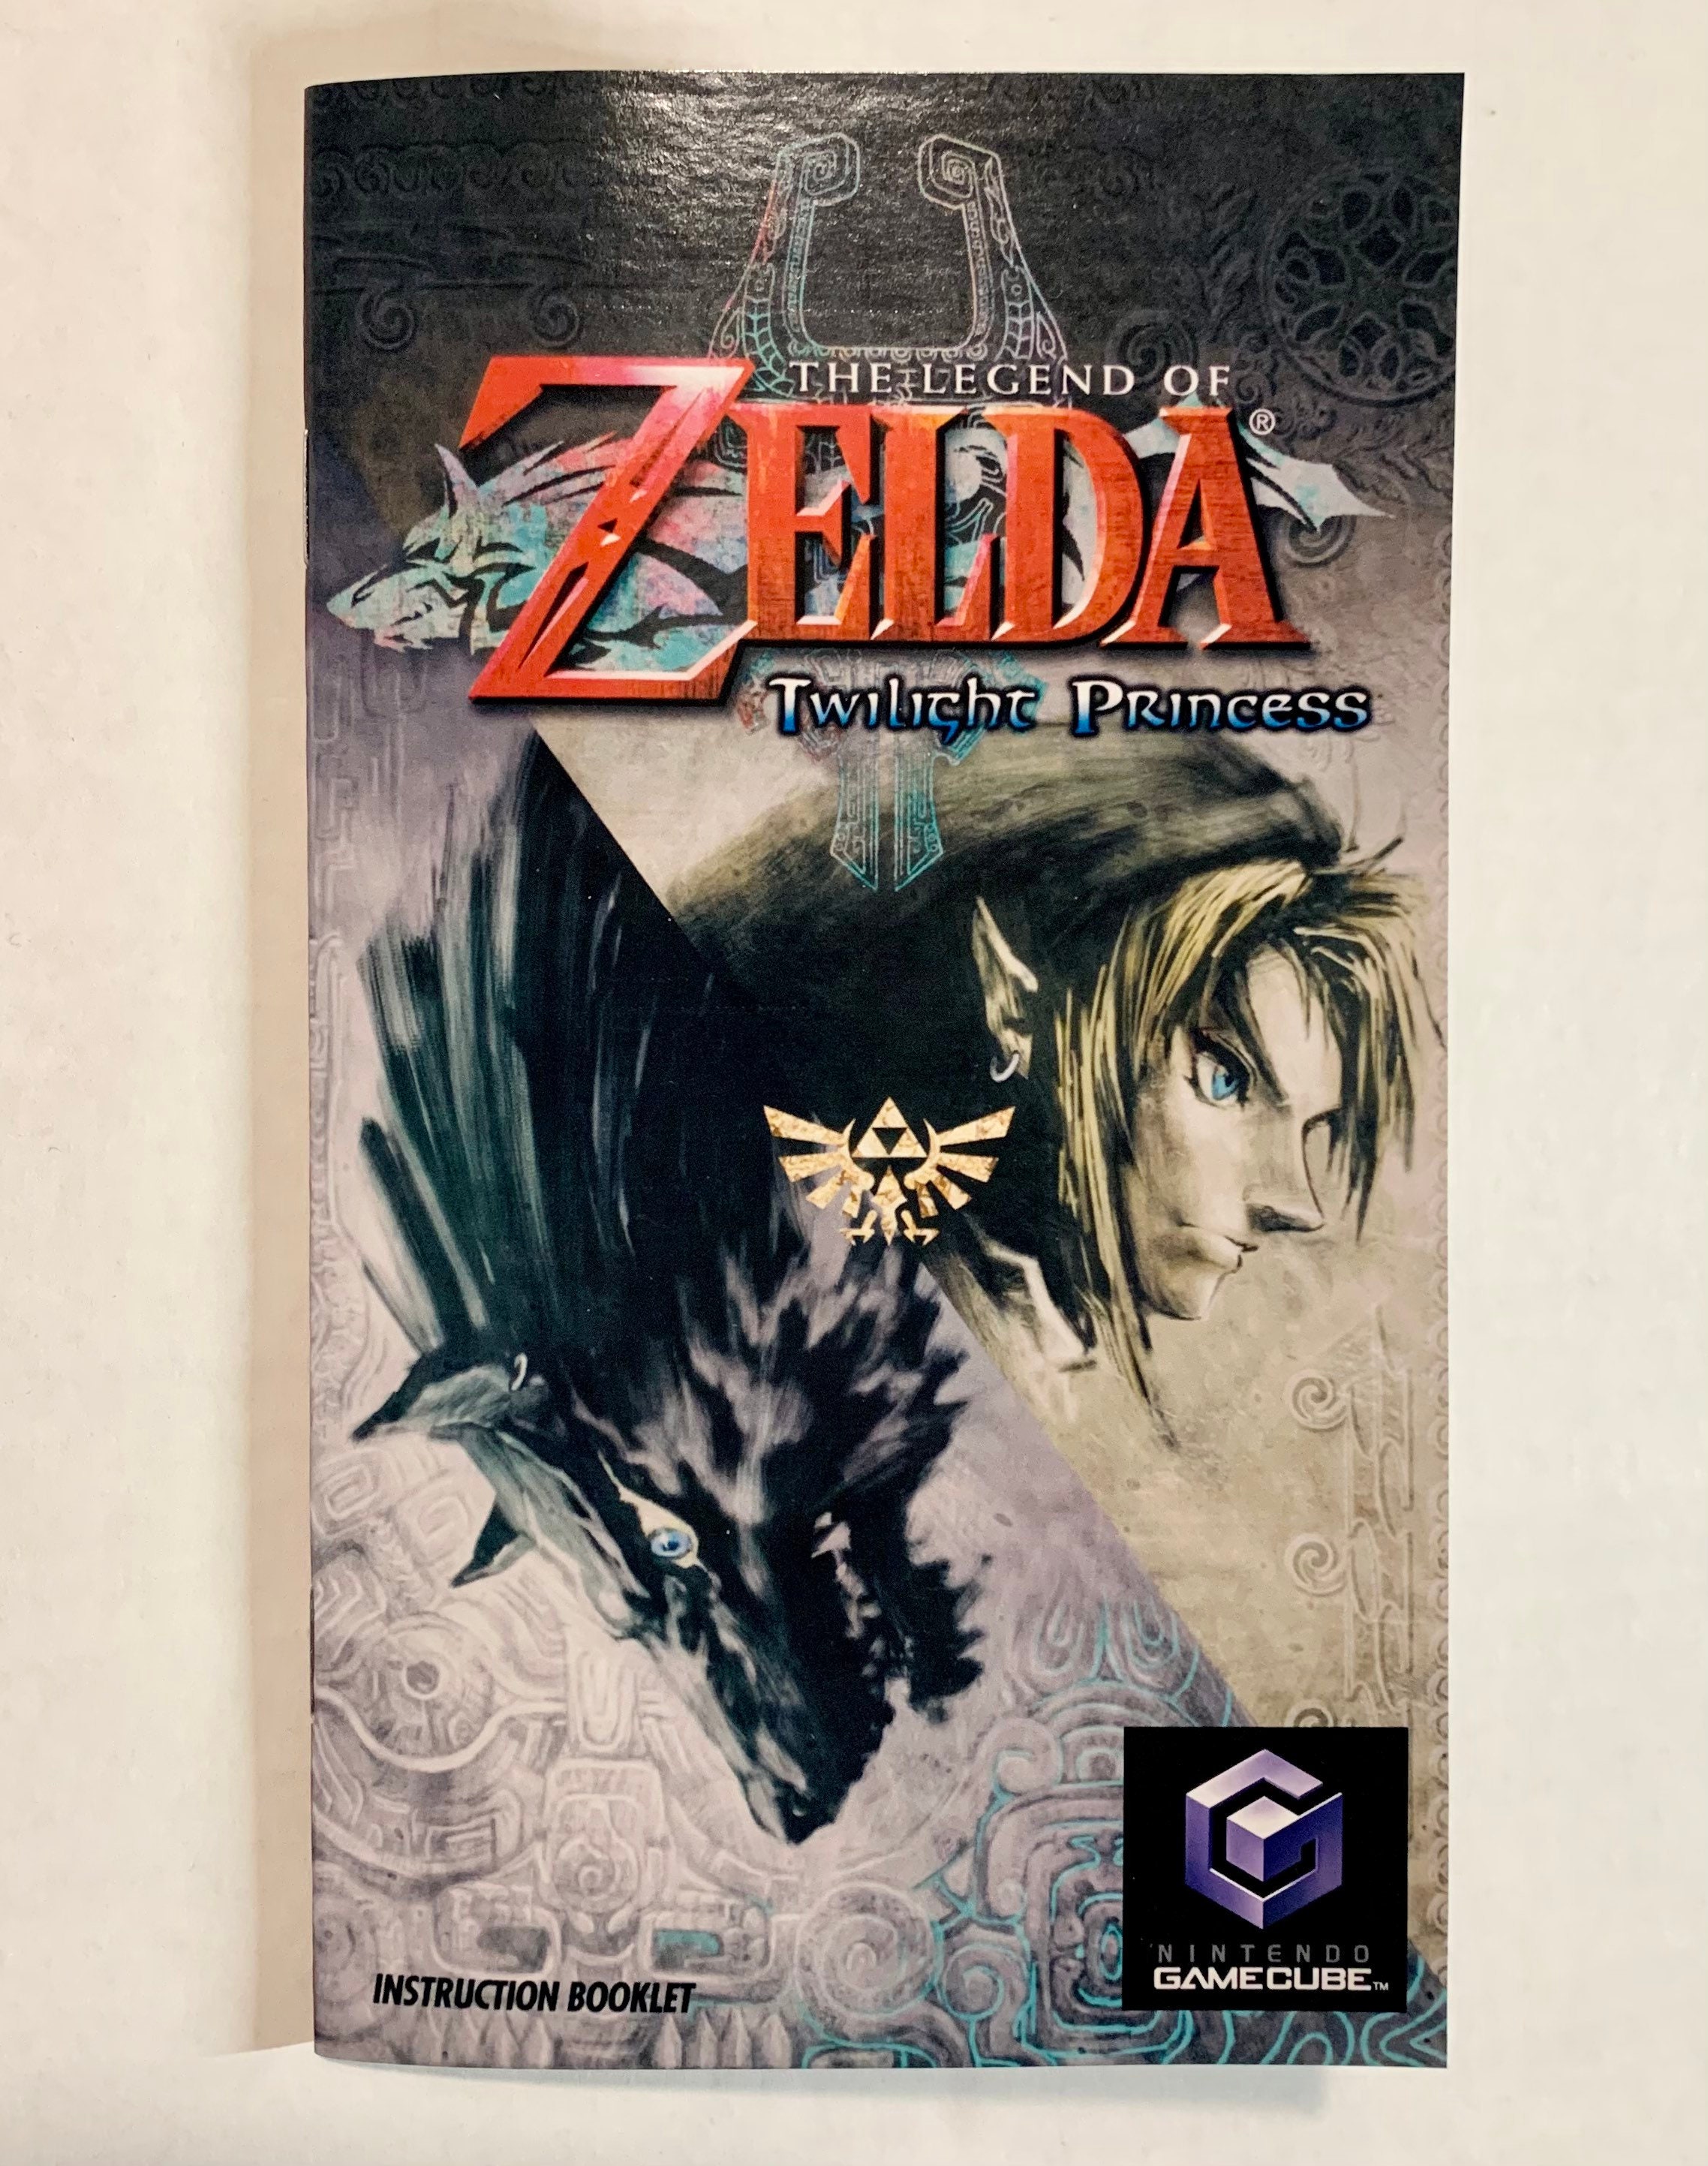 Legend of Zelda The Wind Waker for Nintendo GameCube complete with manual